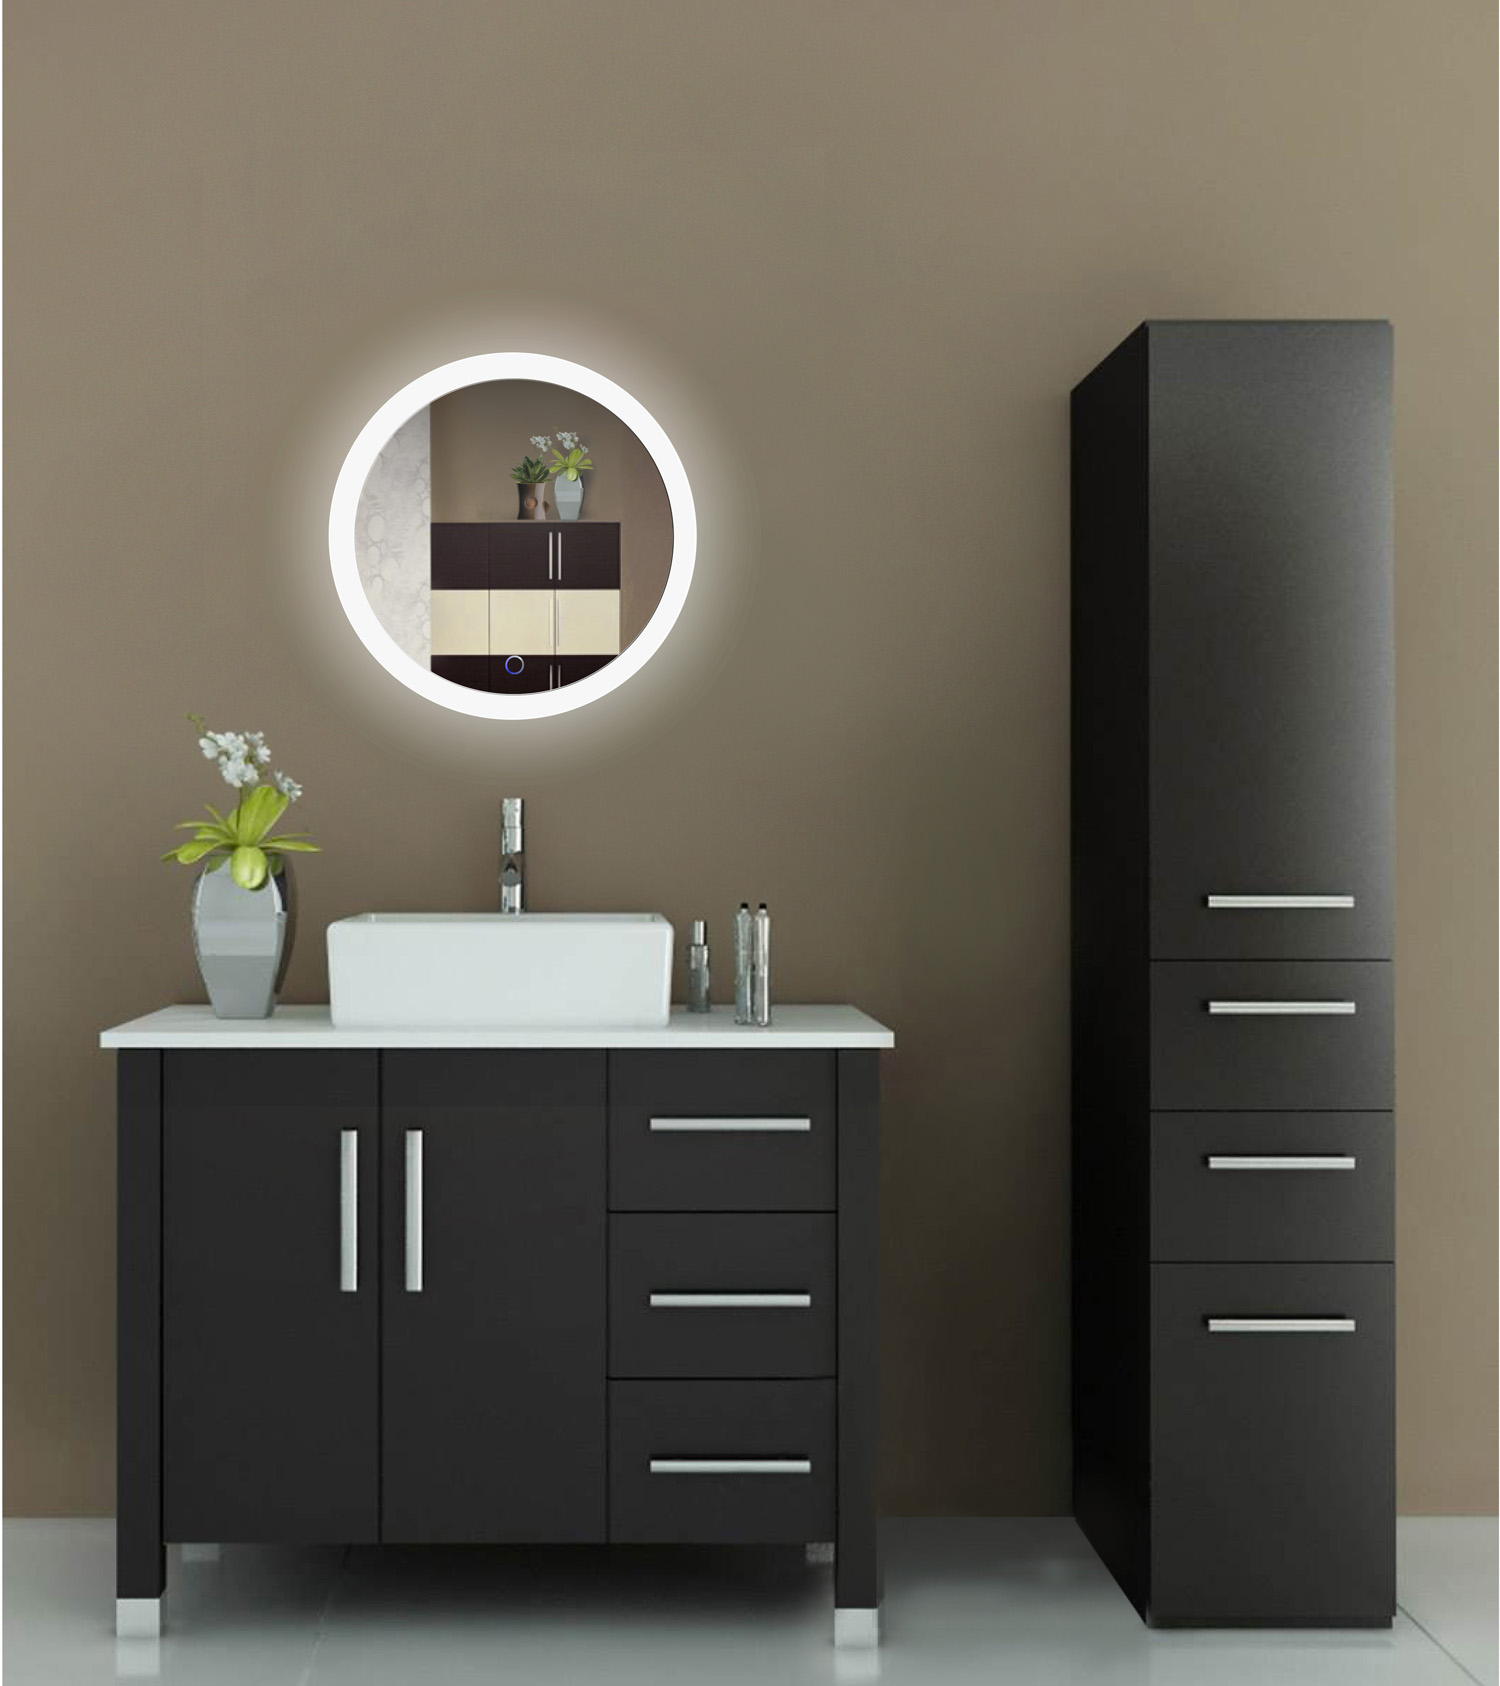 LED 22″ Round Bathroom Mirror Lighted With Dimmer & Defogger